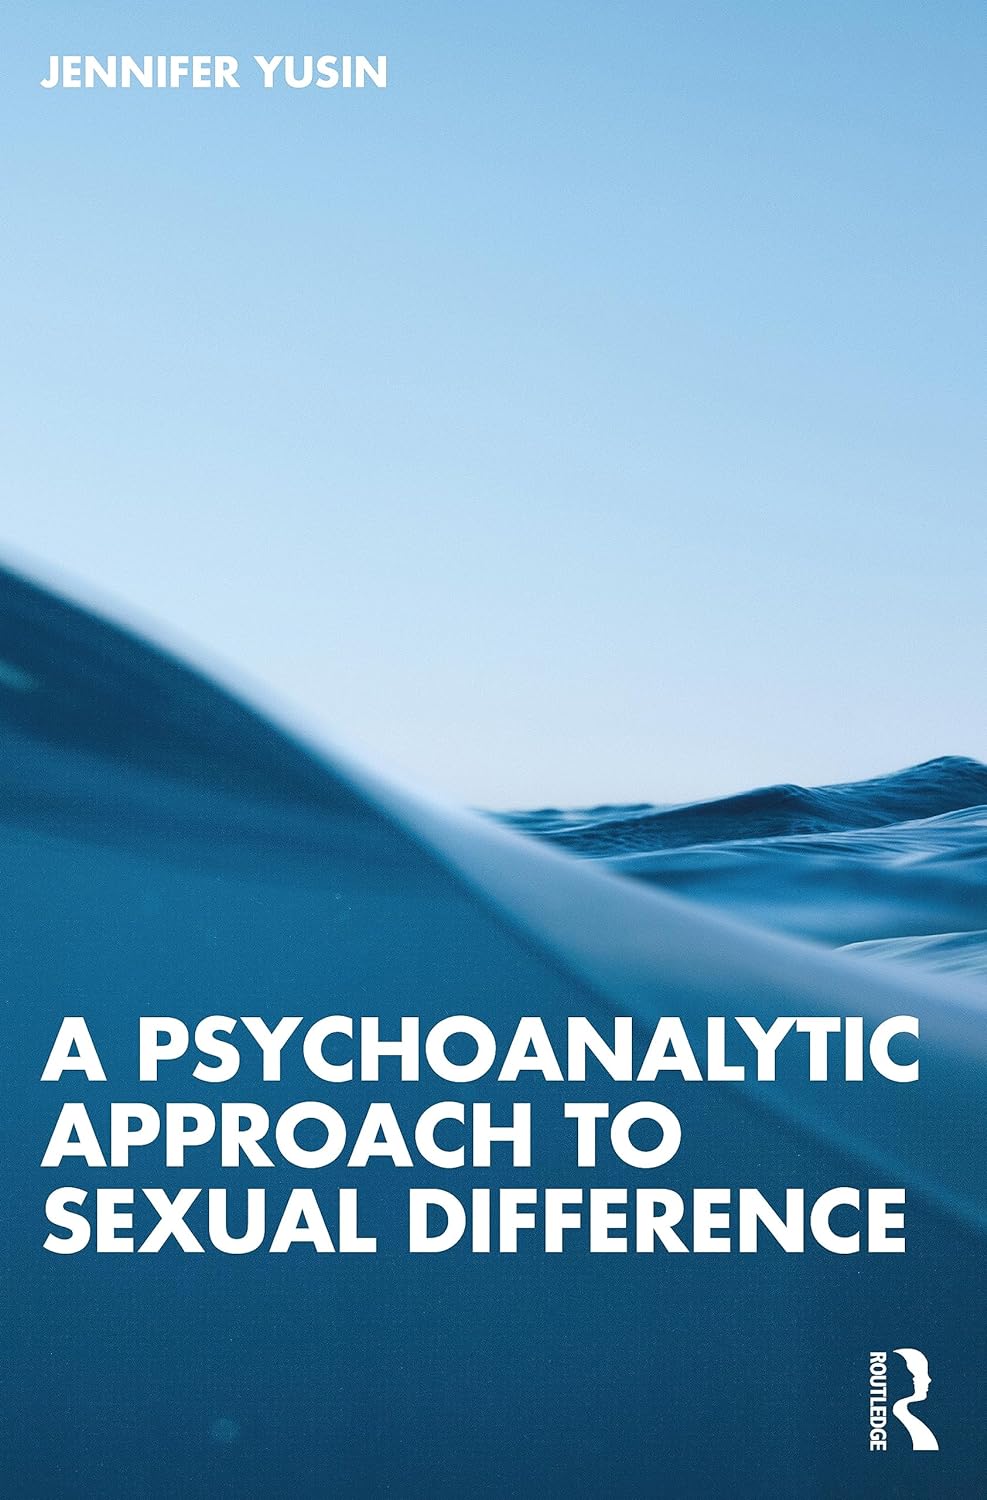 A Psychoanalytic Approach to Sexual Difference